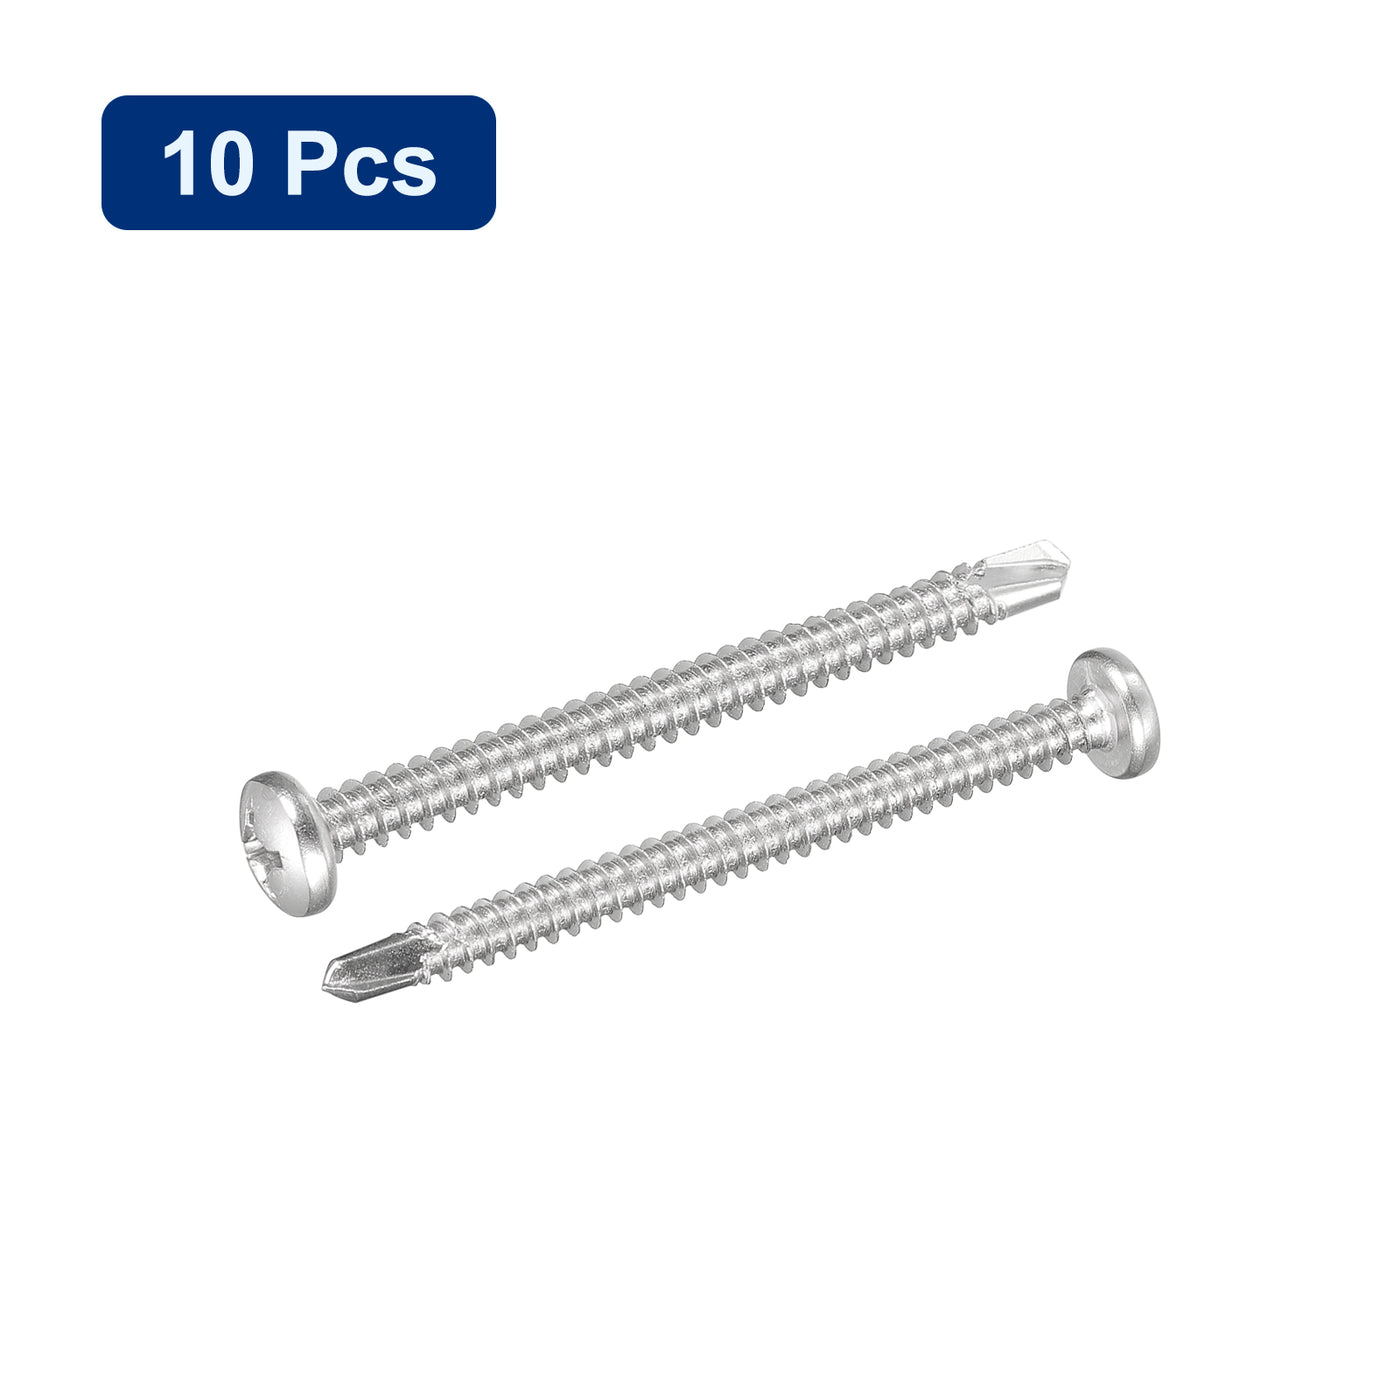 uxcell Uxcell #12 x 2-9/16" Self Drilling Screws, 10pcs Phillips Pan Head Self Tapping Screws